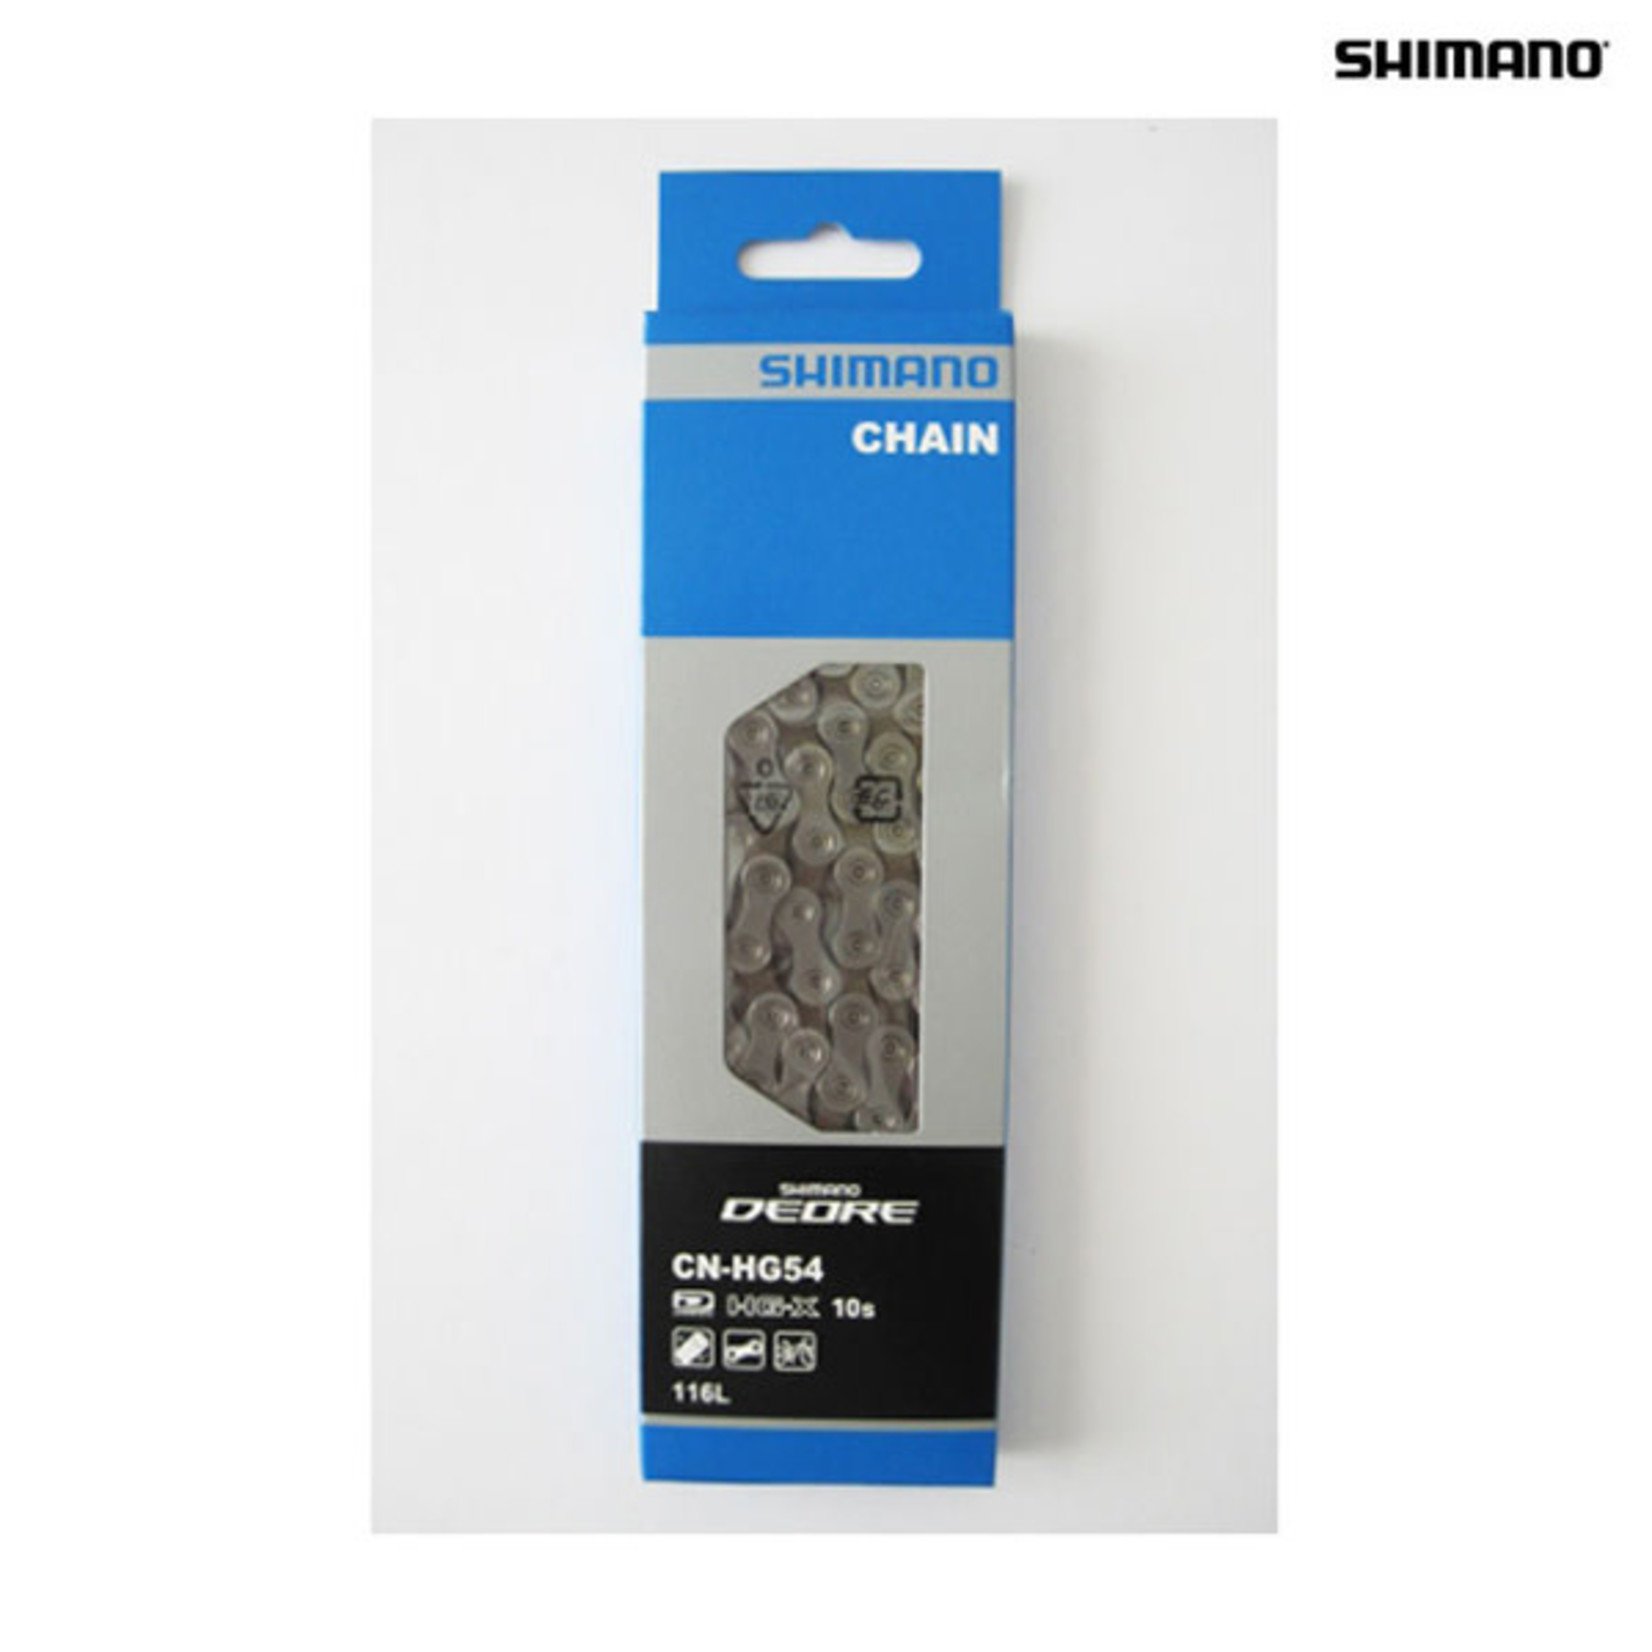 Shimano CN-HG54 Chain MTB 10-SPEED 116 LINKS, W/O END PIN, W/AMPOULE TYPE CONNECT PIN (1), IND.PACK